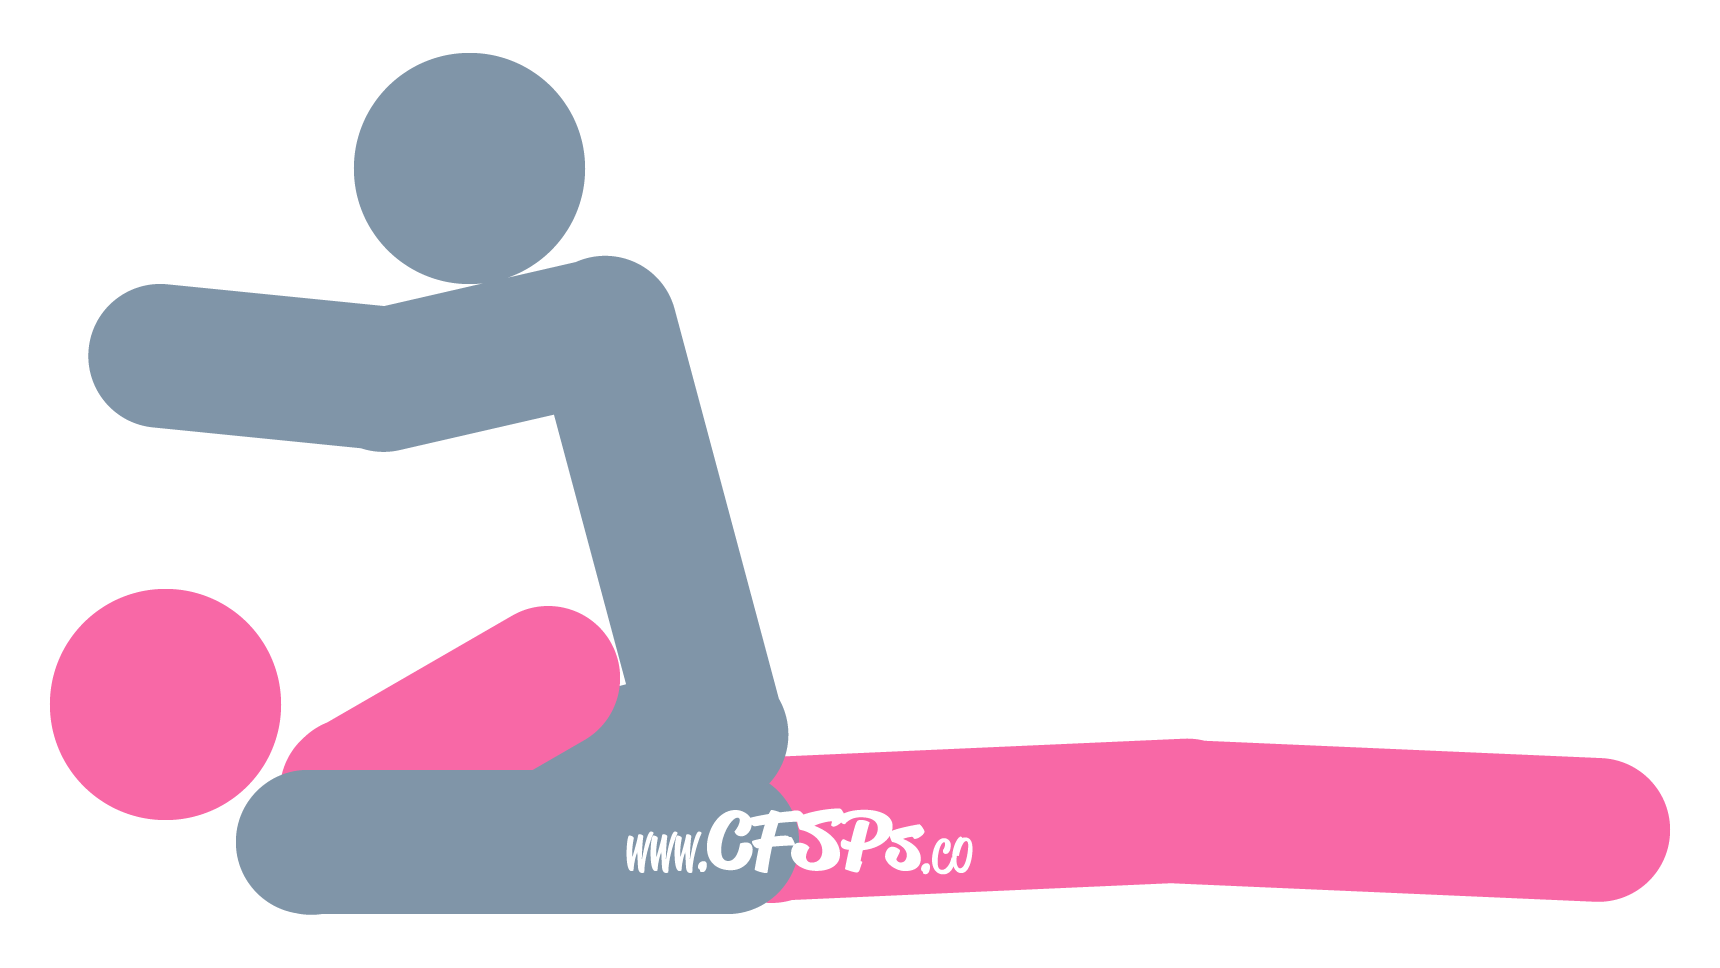 This stick figure image depicts a man and woman engaging in breast sex in the Ta-Tas boob sex position. The woman is lying on her back. The man is straddling her stomach on his knees on each side of her while holding onto the headboard with his hands for support.